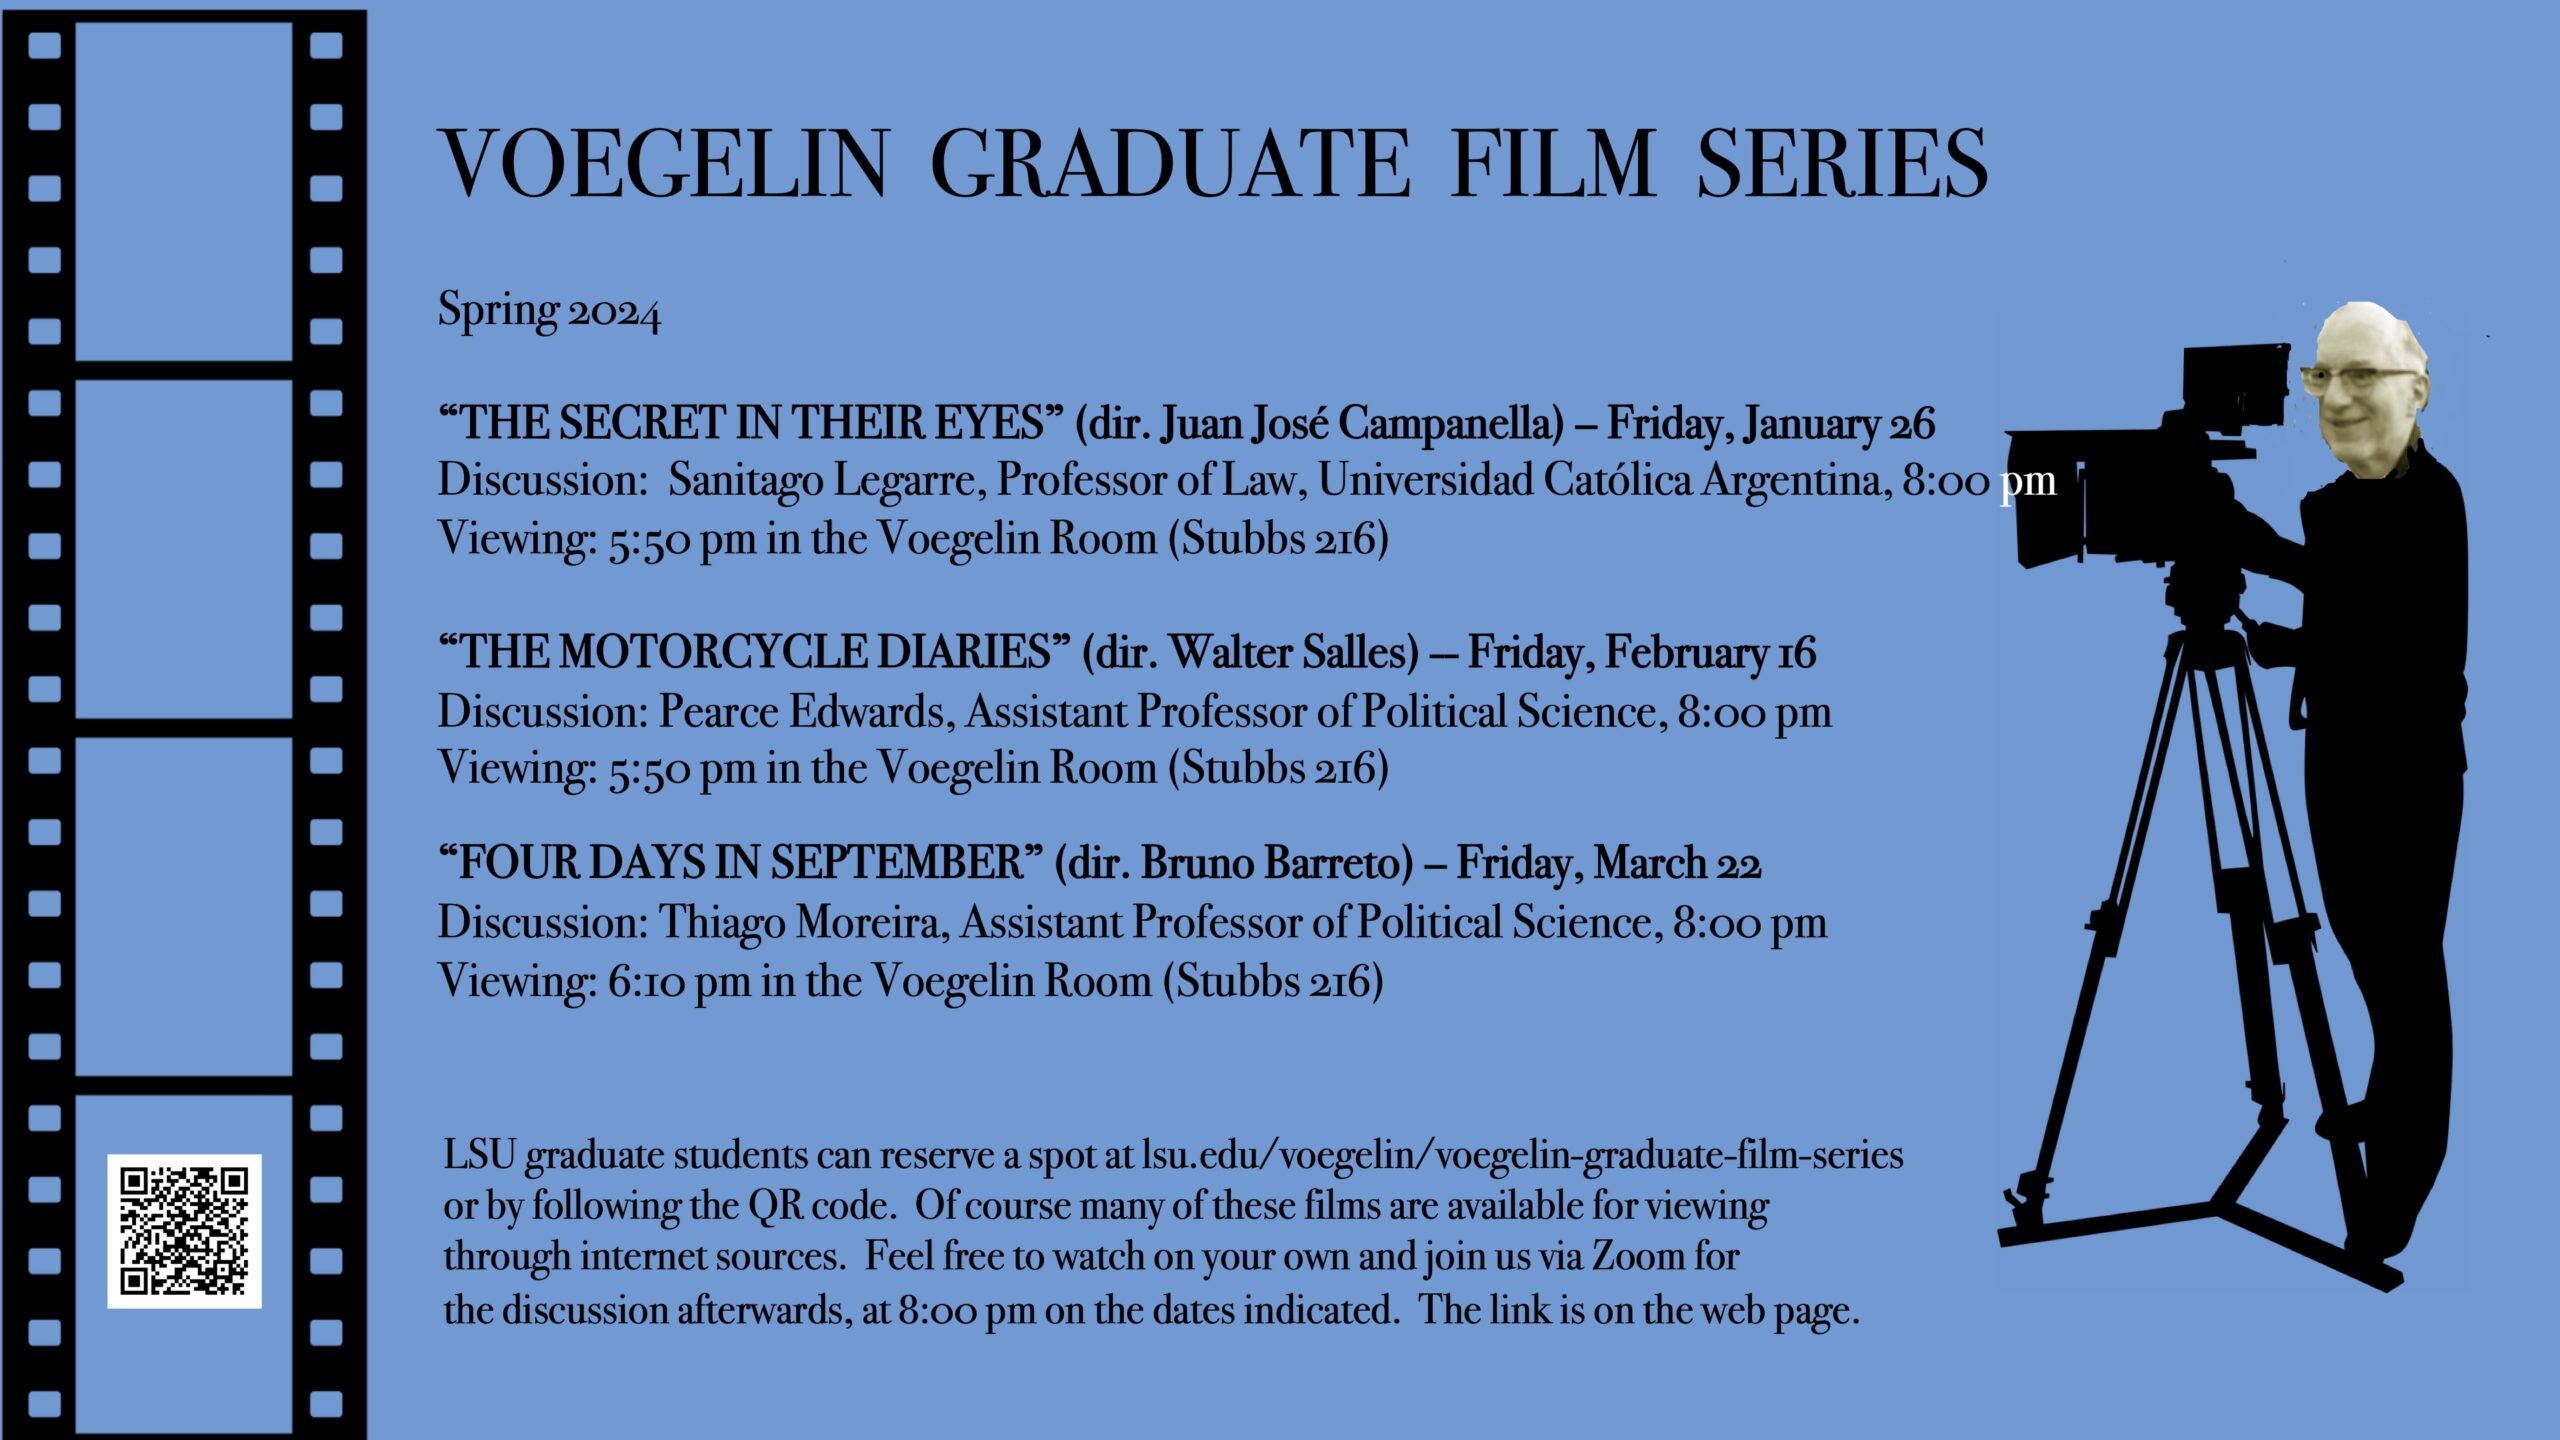 Flyer for Voegelin Graduate Film Series - Movies and Dates listed below